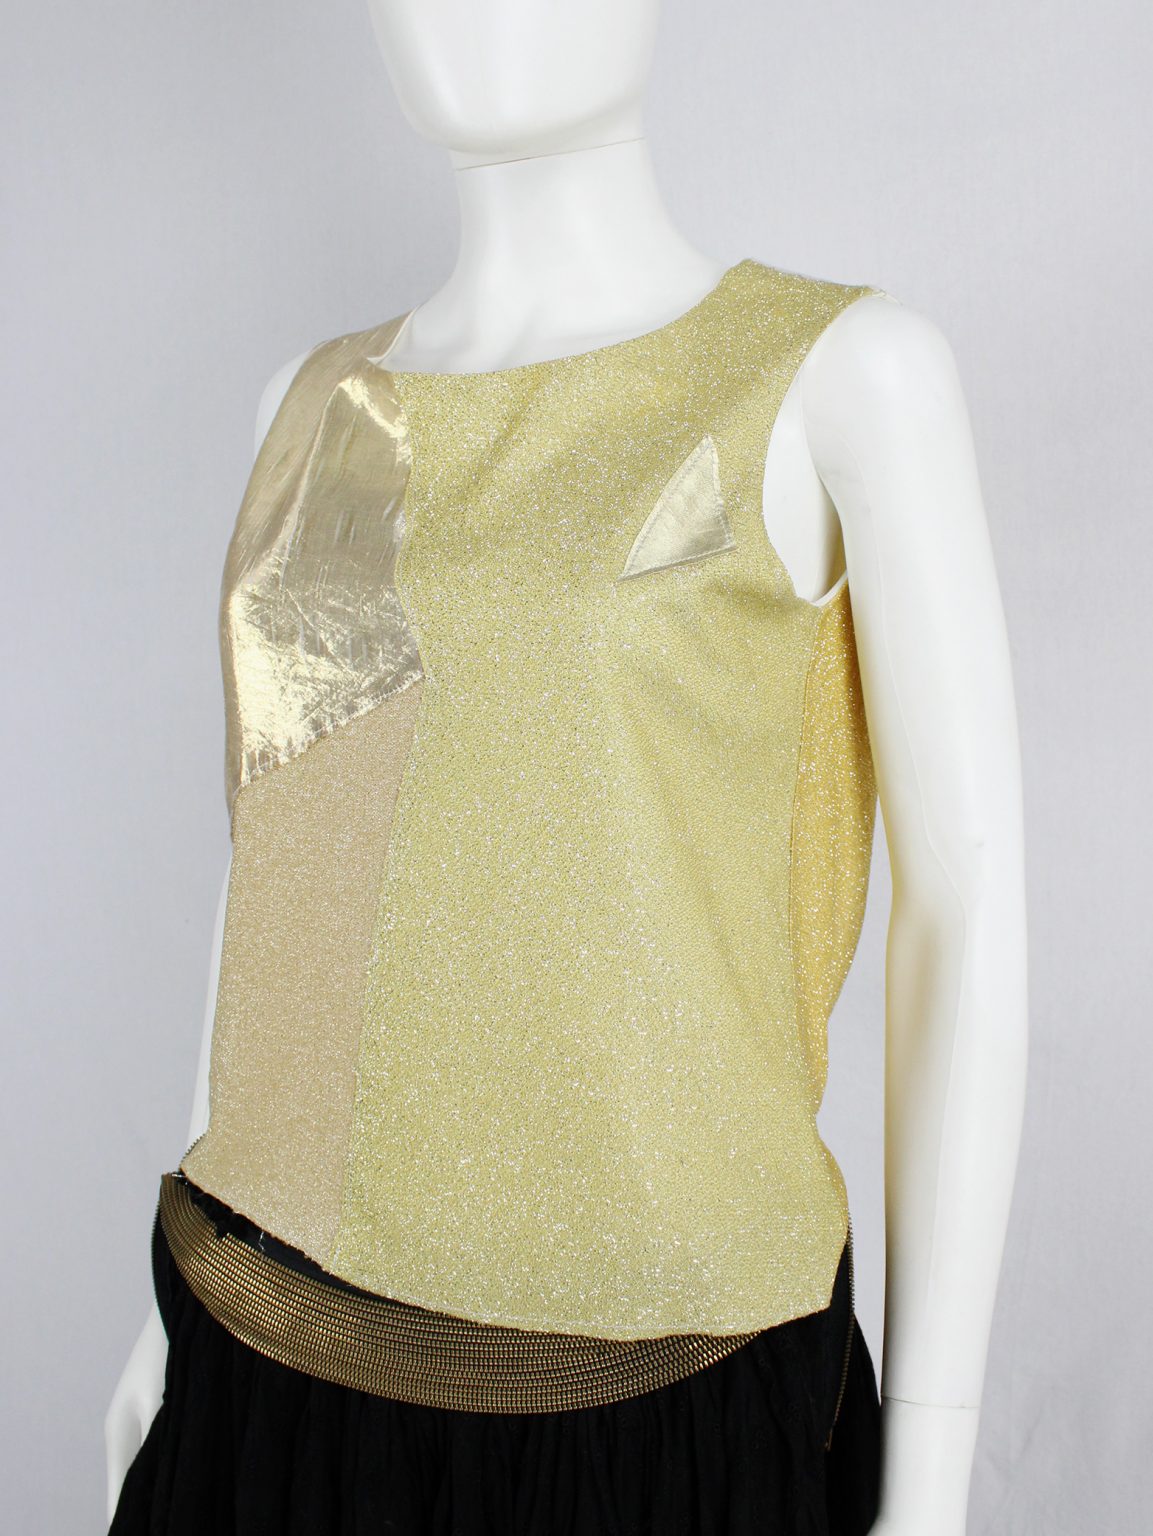 Maison Martin Margiela artisanal gold top made of multiple fabric patches — fall 2004